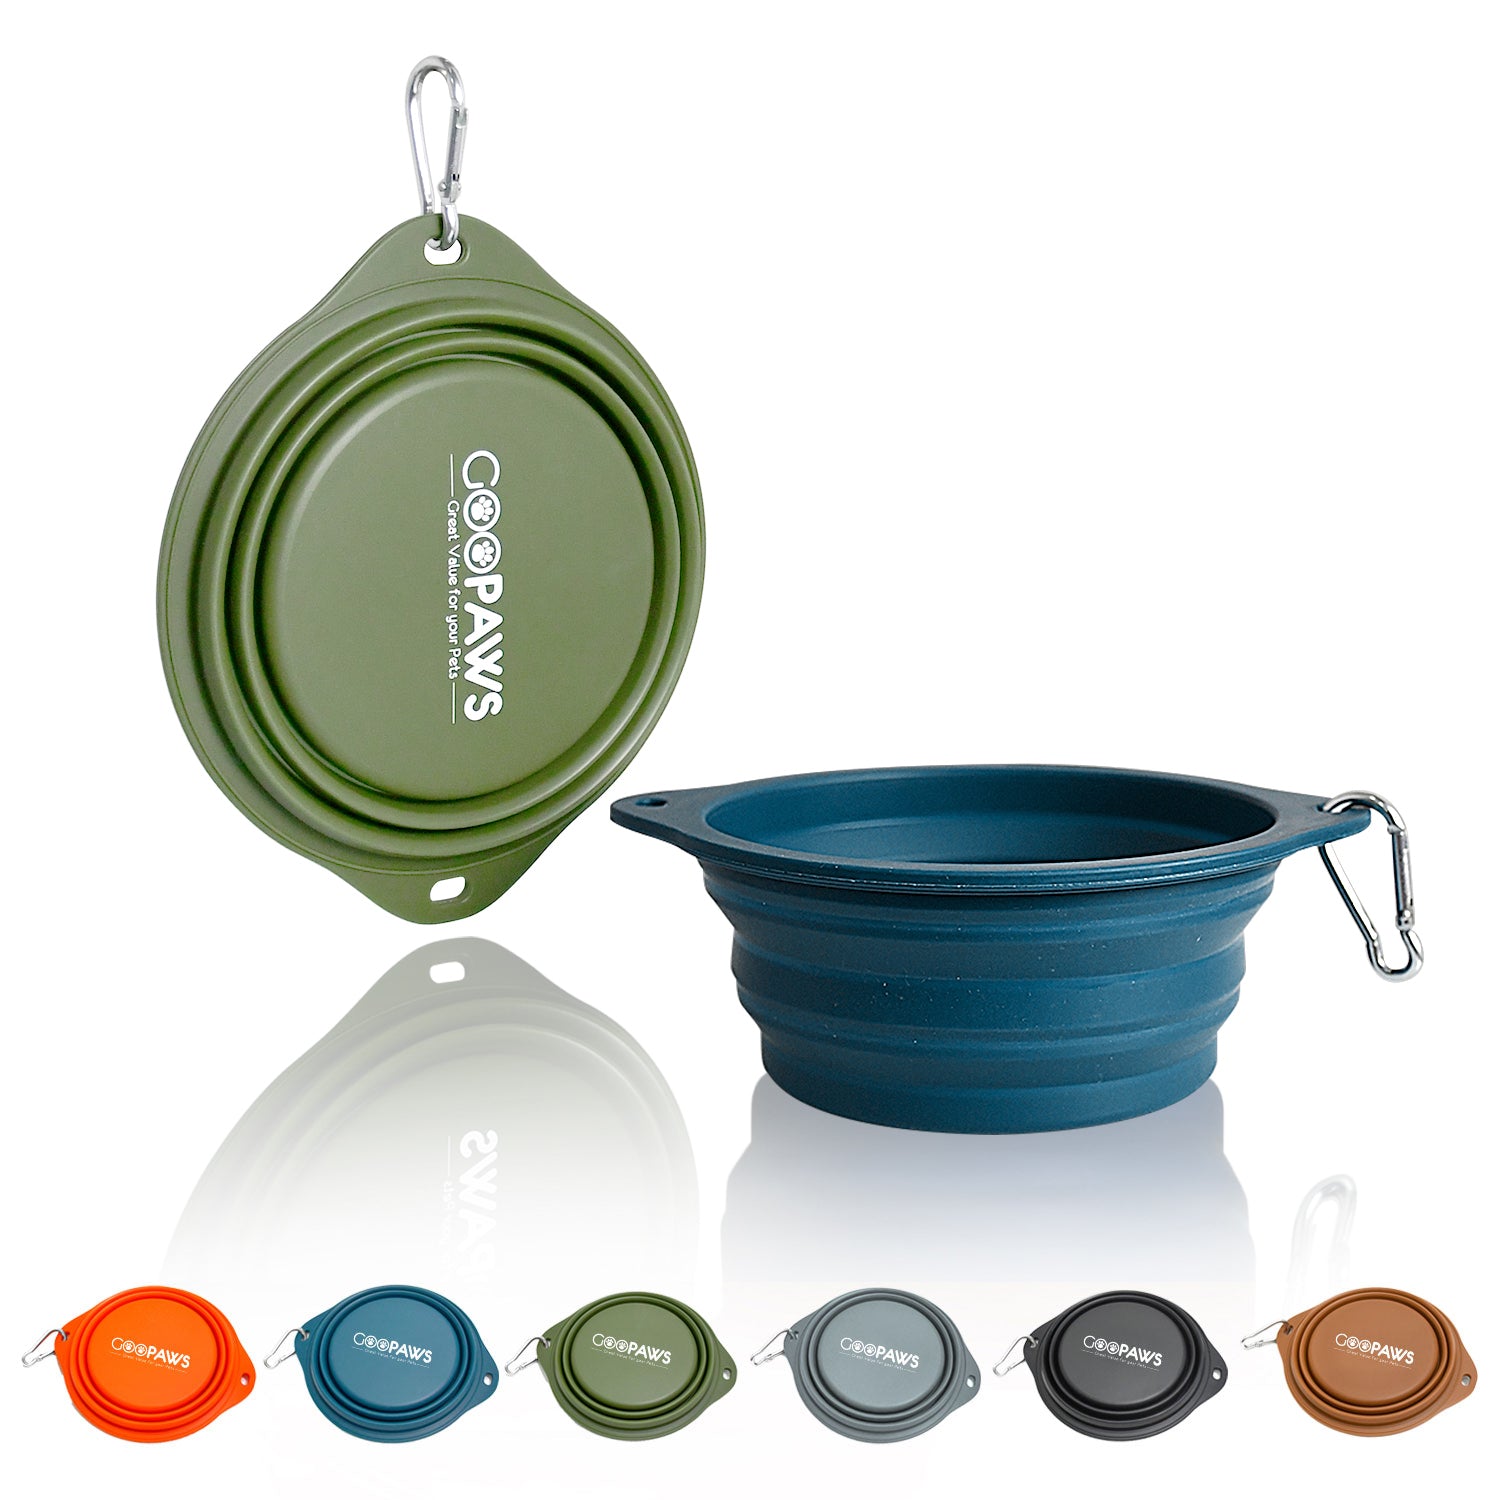 GOOPAWS 2 Pack Silicone Non-Skid Travel Dog and Cat Bowl, Blue&Green